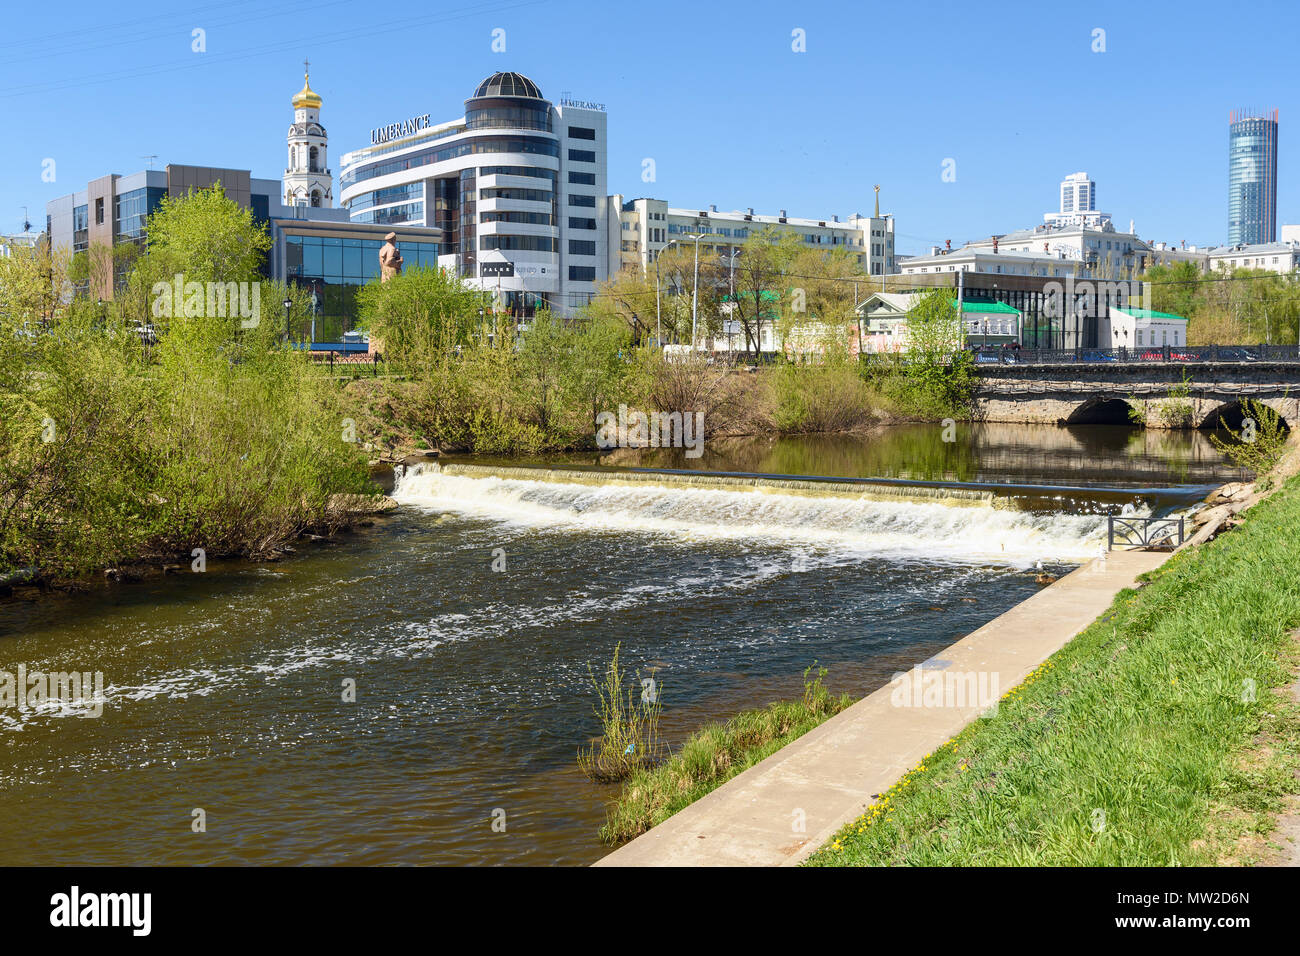 Yekaterinburg, Russia - May 23, 2018: View of embankment on Iset River in center of city Stock Photo